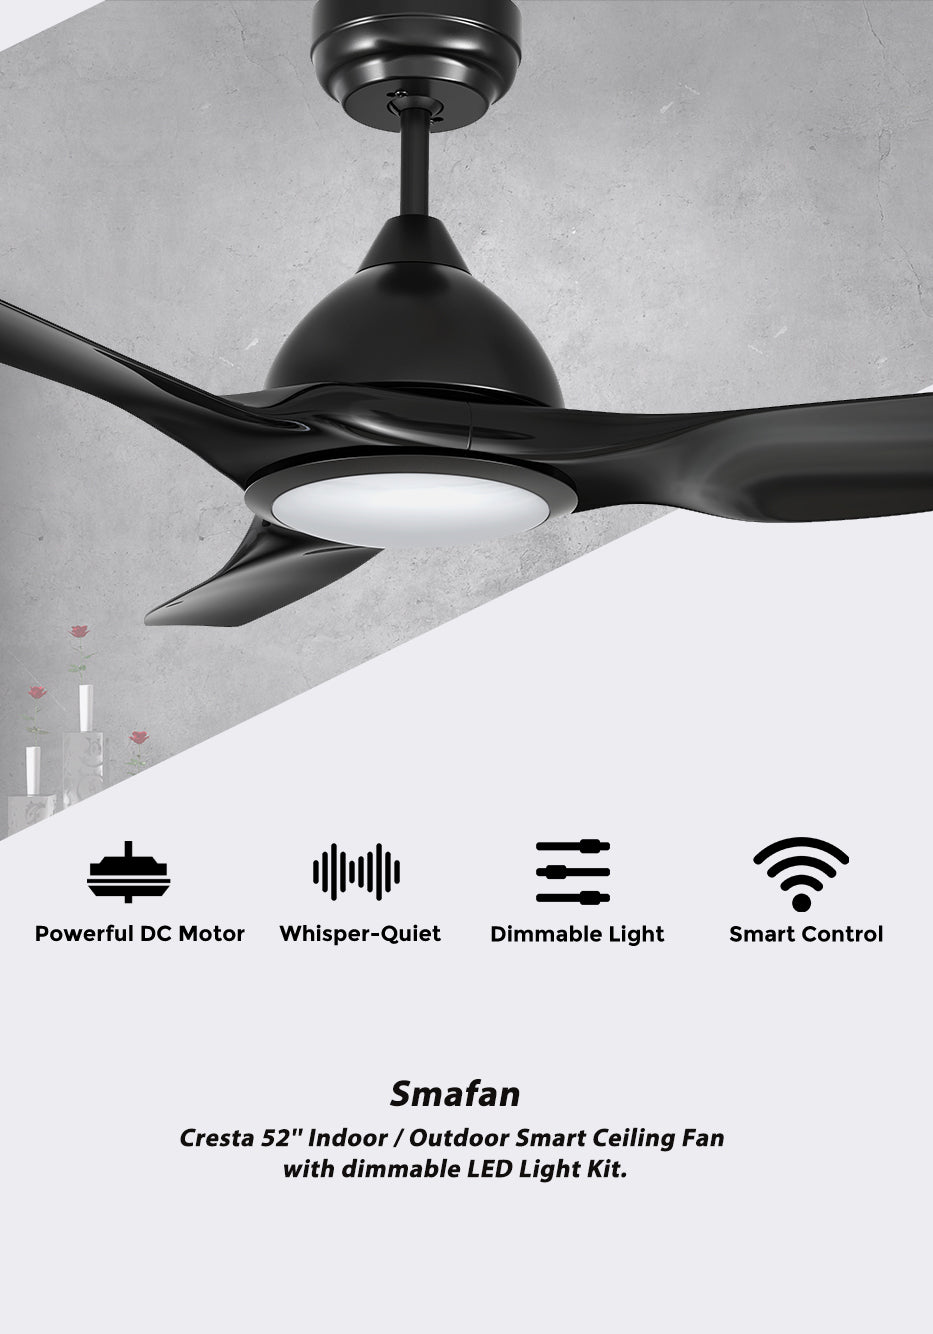 Carro-Smafan-Cresta-52”-Indoor-and-Outdoor-Ceiling-Fan-Controlled-by-Remote-and-Smart-APP.